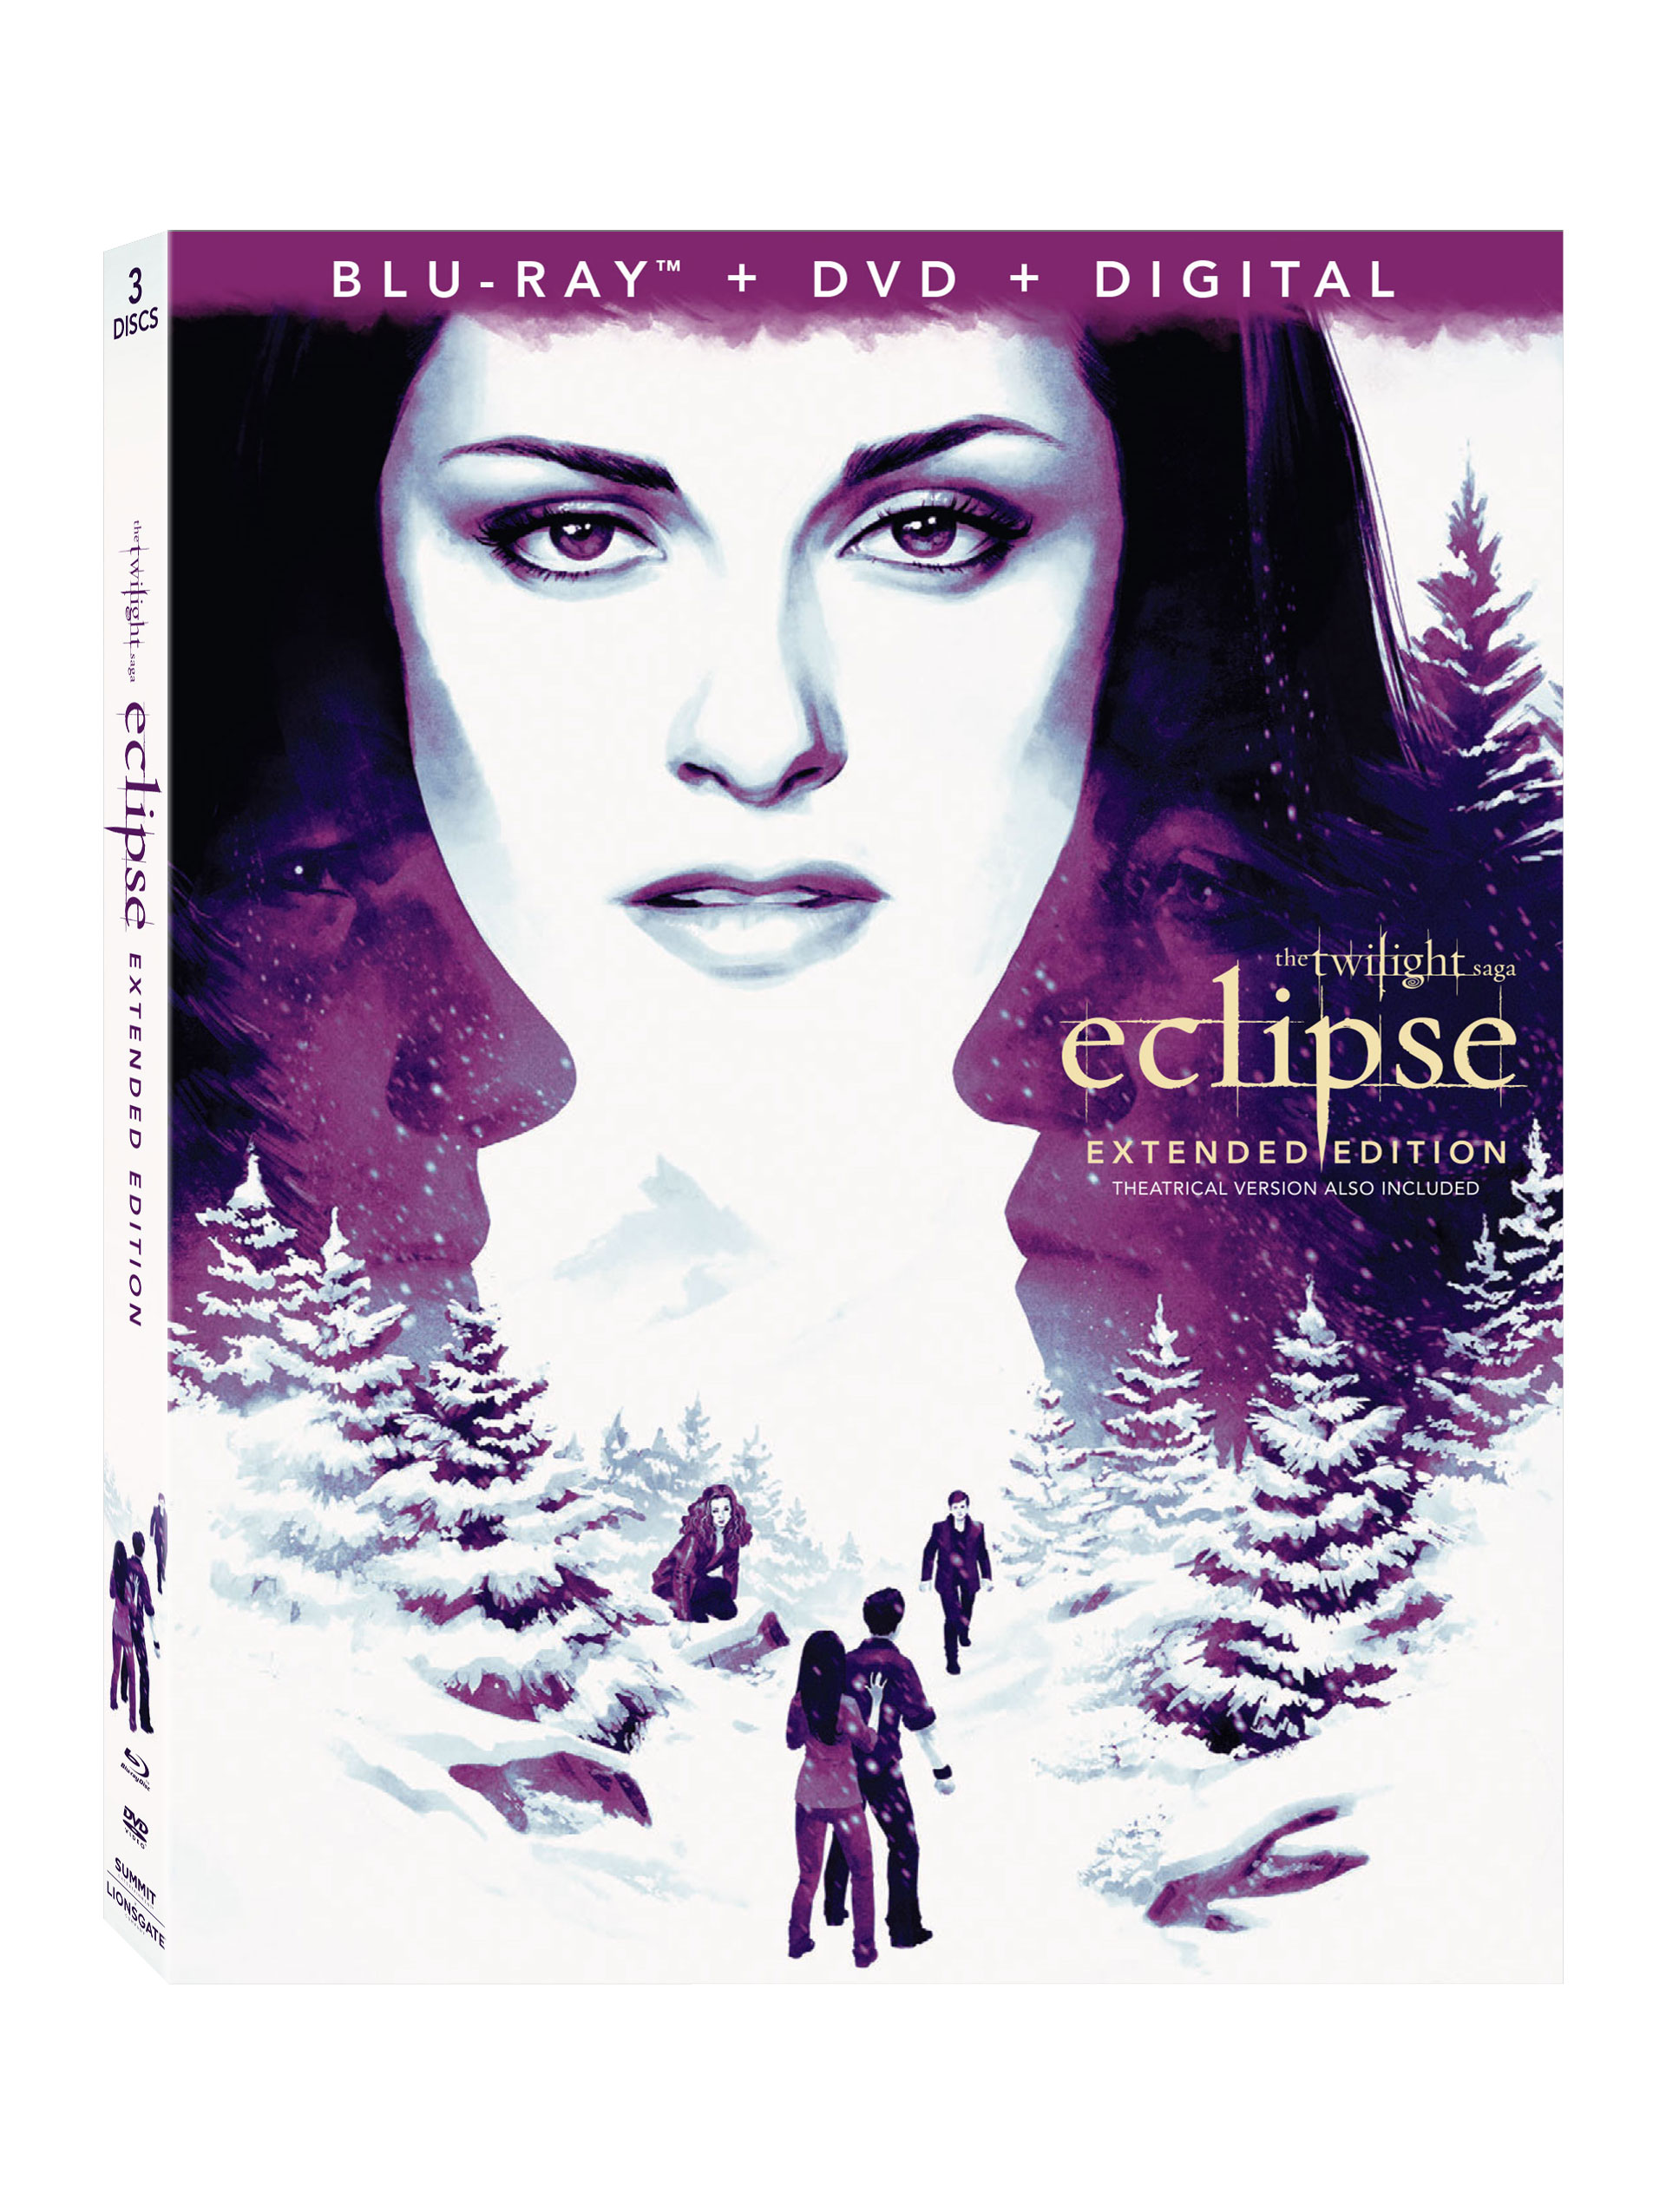 The Twilight Saga Eclipse Blu-Ray Combo Pack Cover (Lionsgate Home Entertainment)